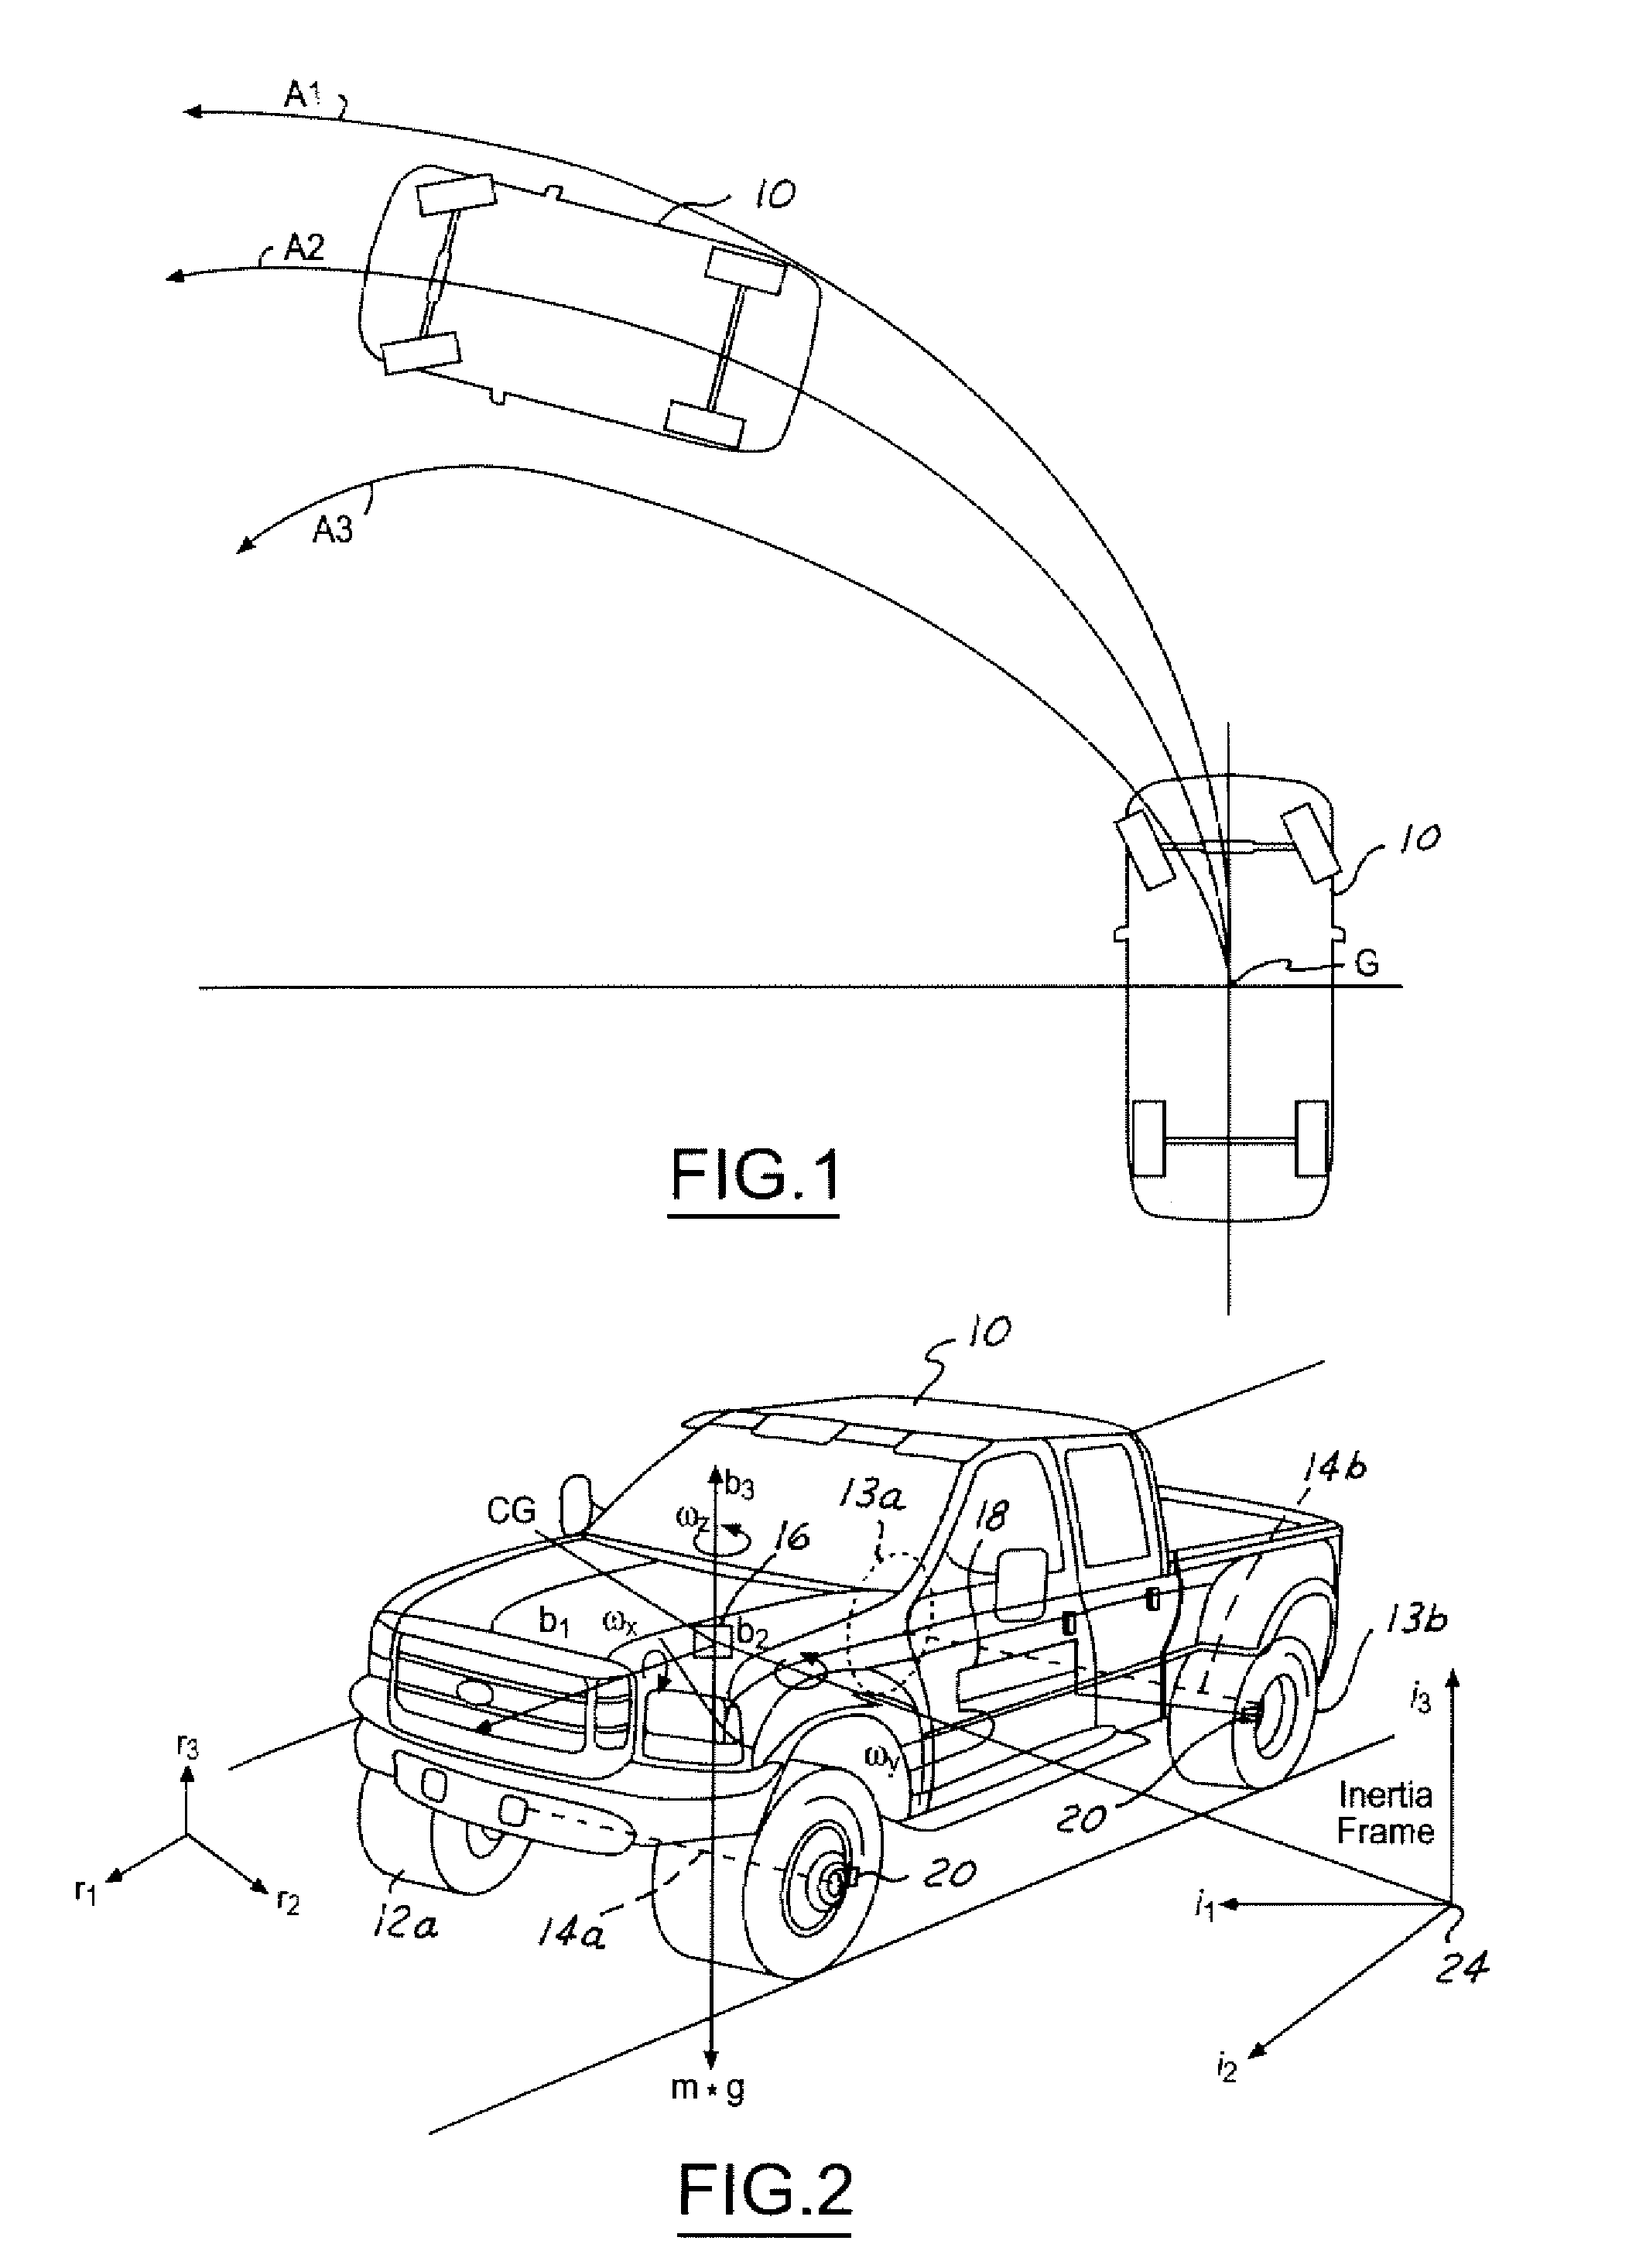 Method of controlling an automotive vehicle having a trailer using rear axle slip angle